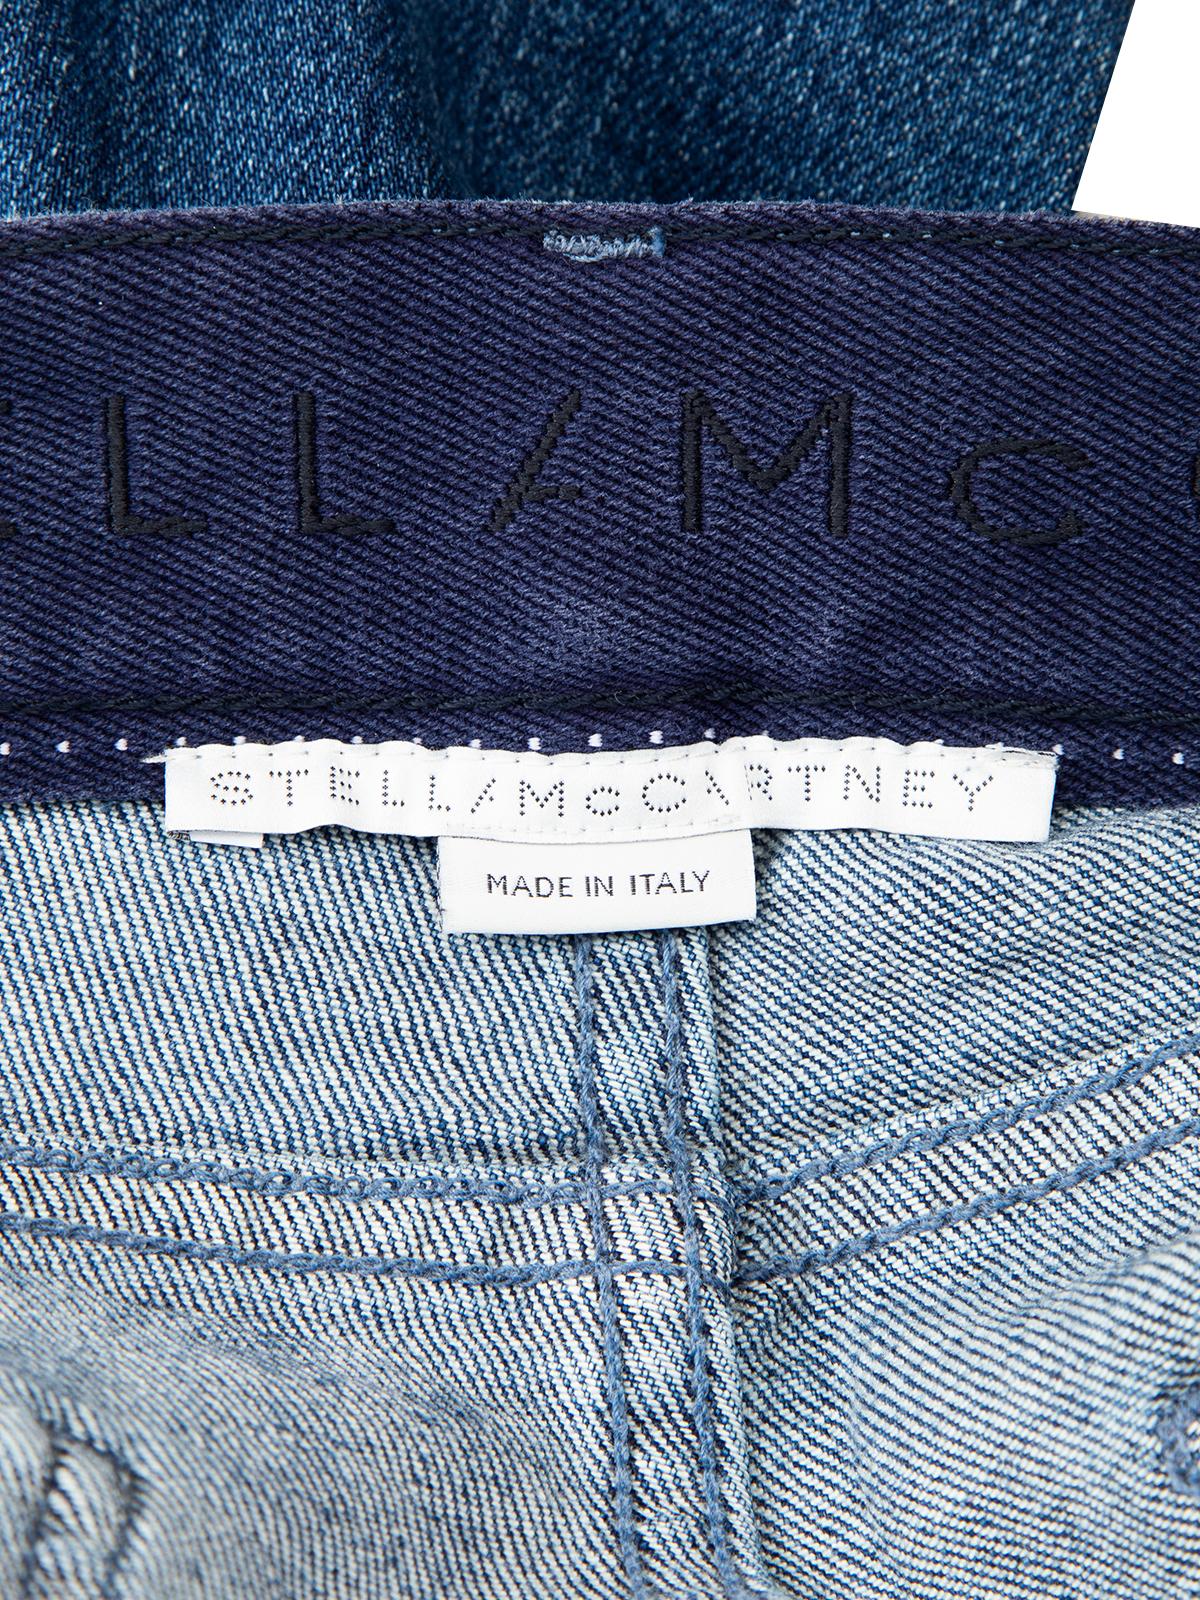 Pre-Loved Stella McCartney Women's Jeans with Embellishment Detail 2